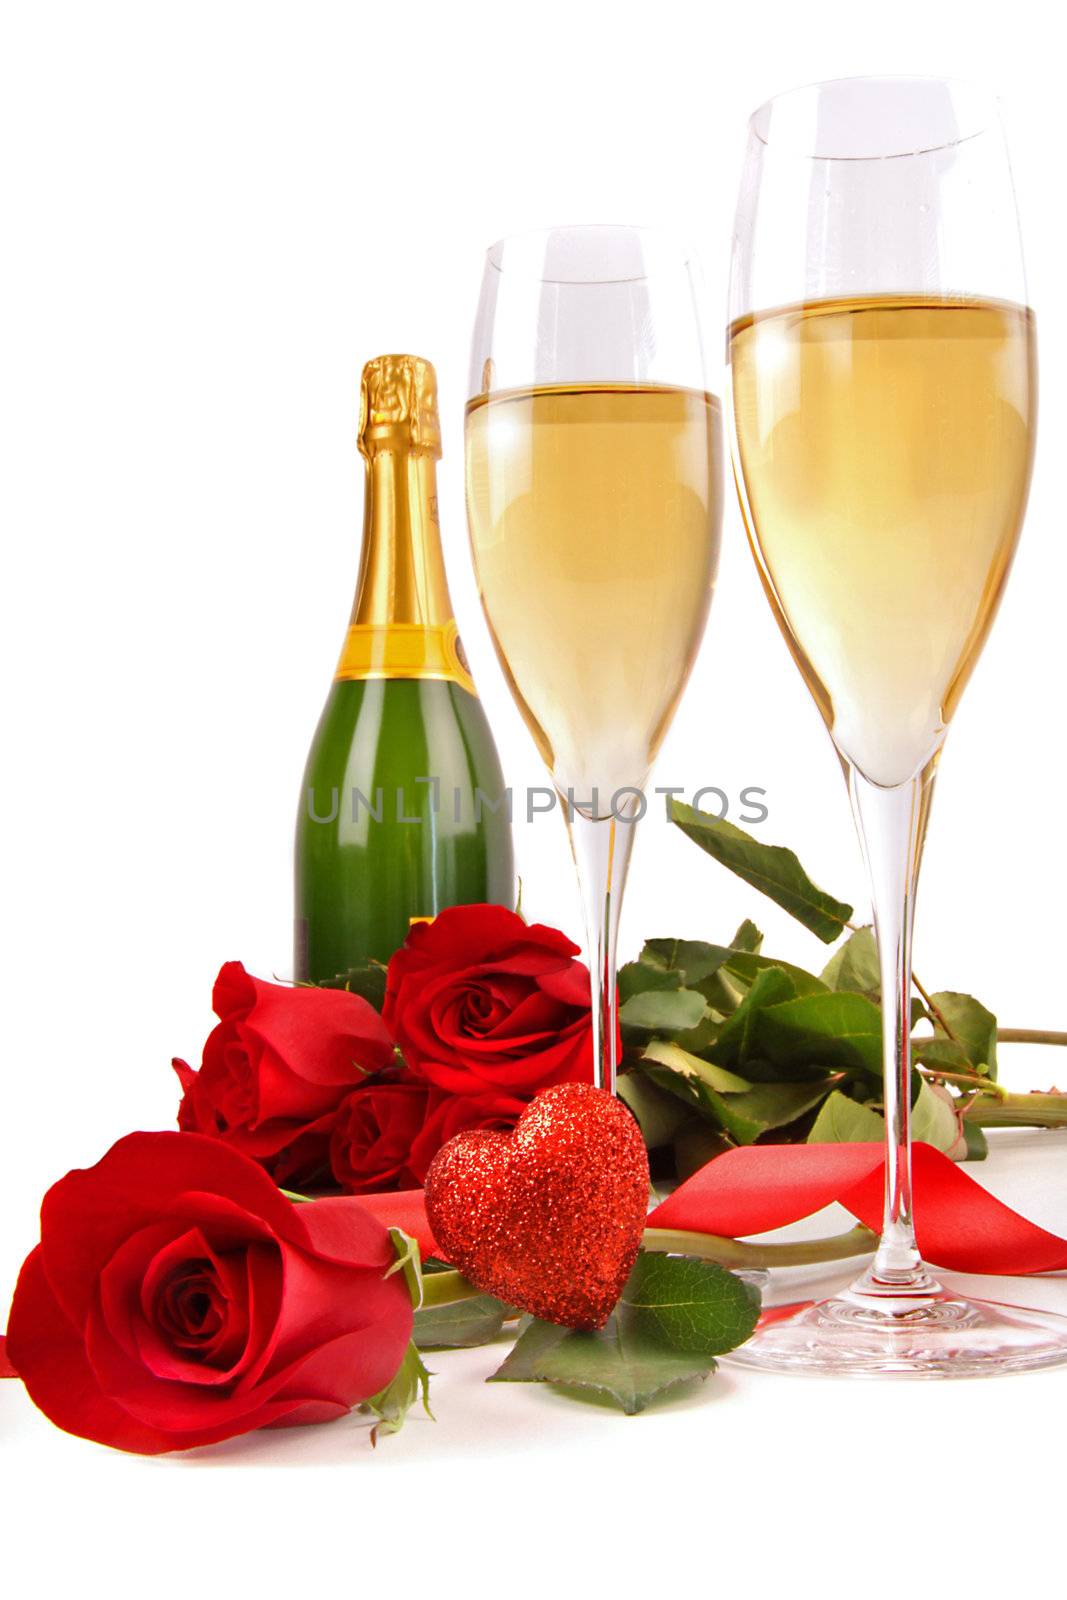 Champagne glasses with red roses and little heart on white